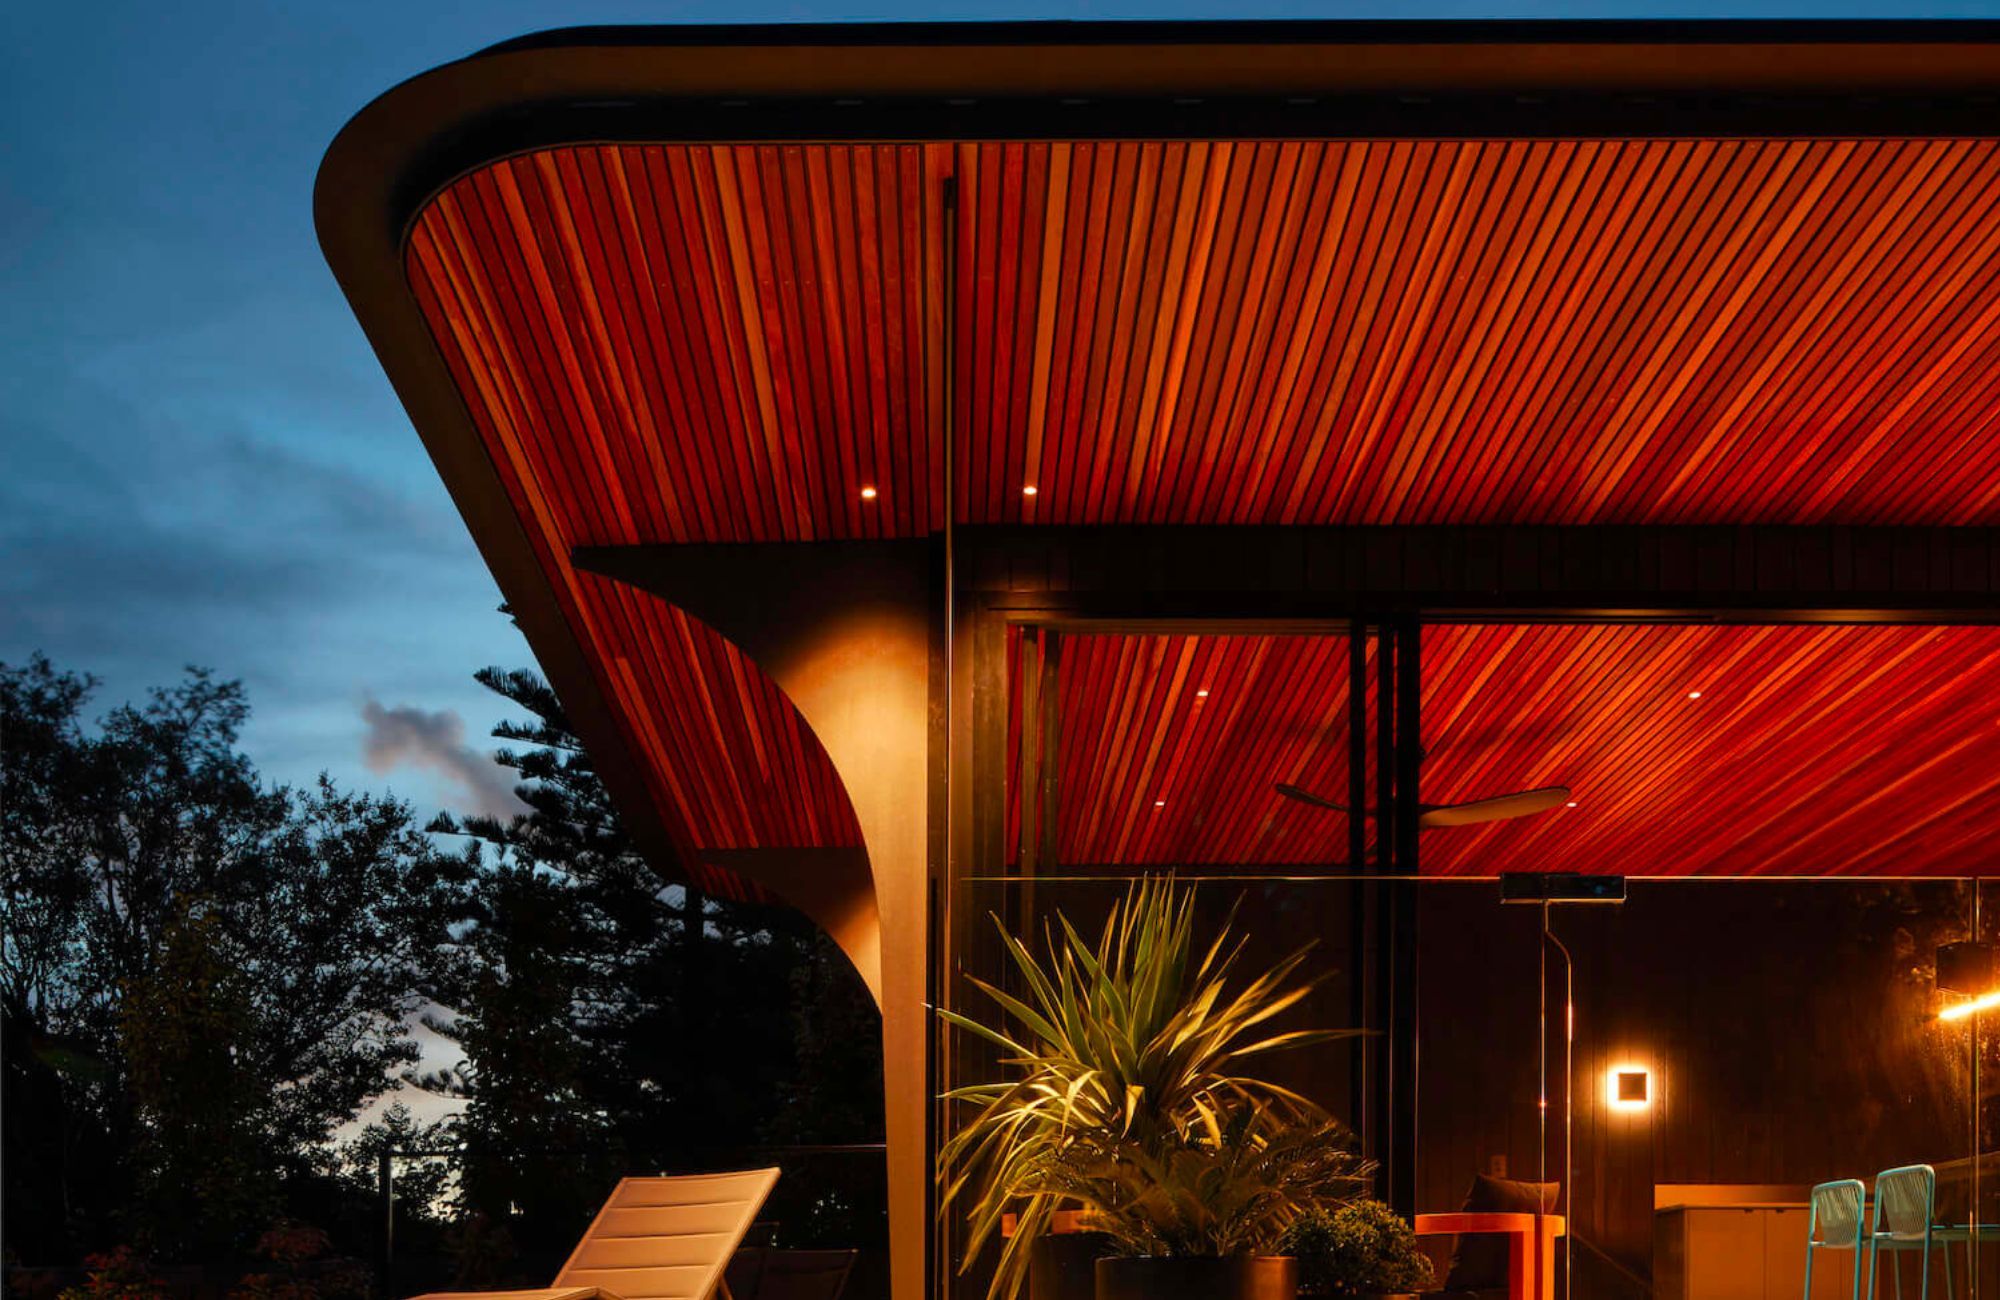 Castlecrag Pavilion by Mcnally Architects showing timber lined ceiling